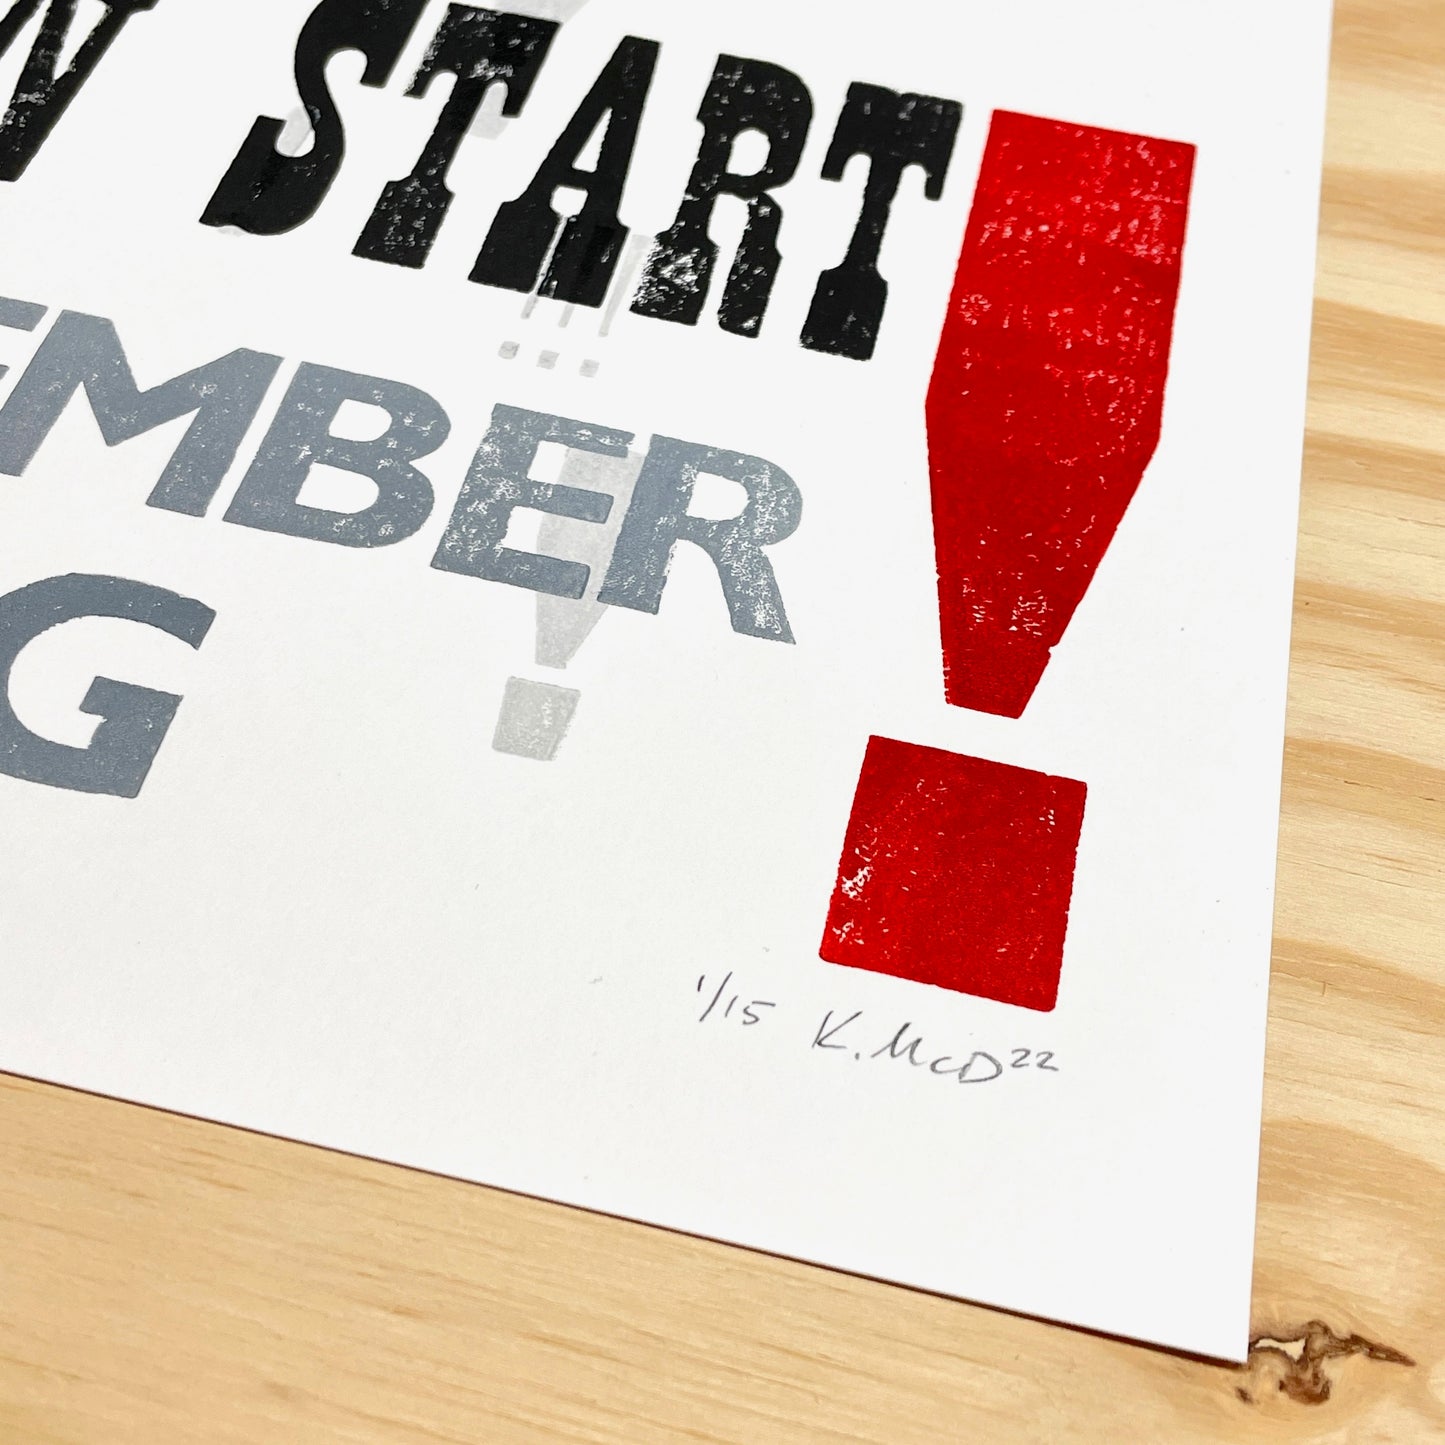 Start Remembering - Wood Type Letterpress Quote (9x12")